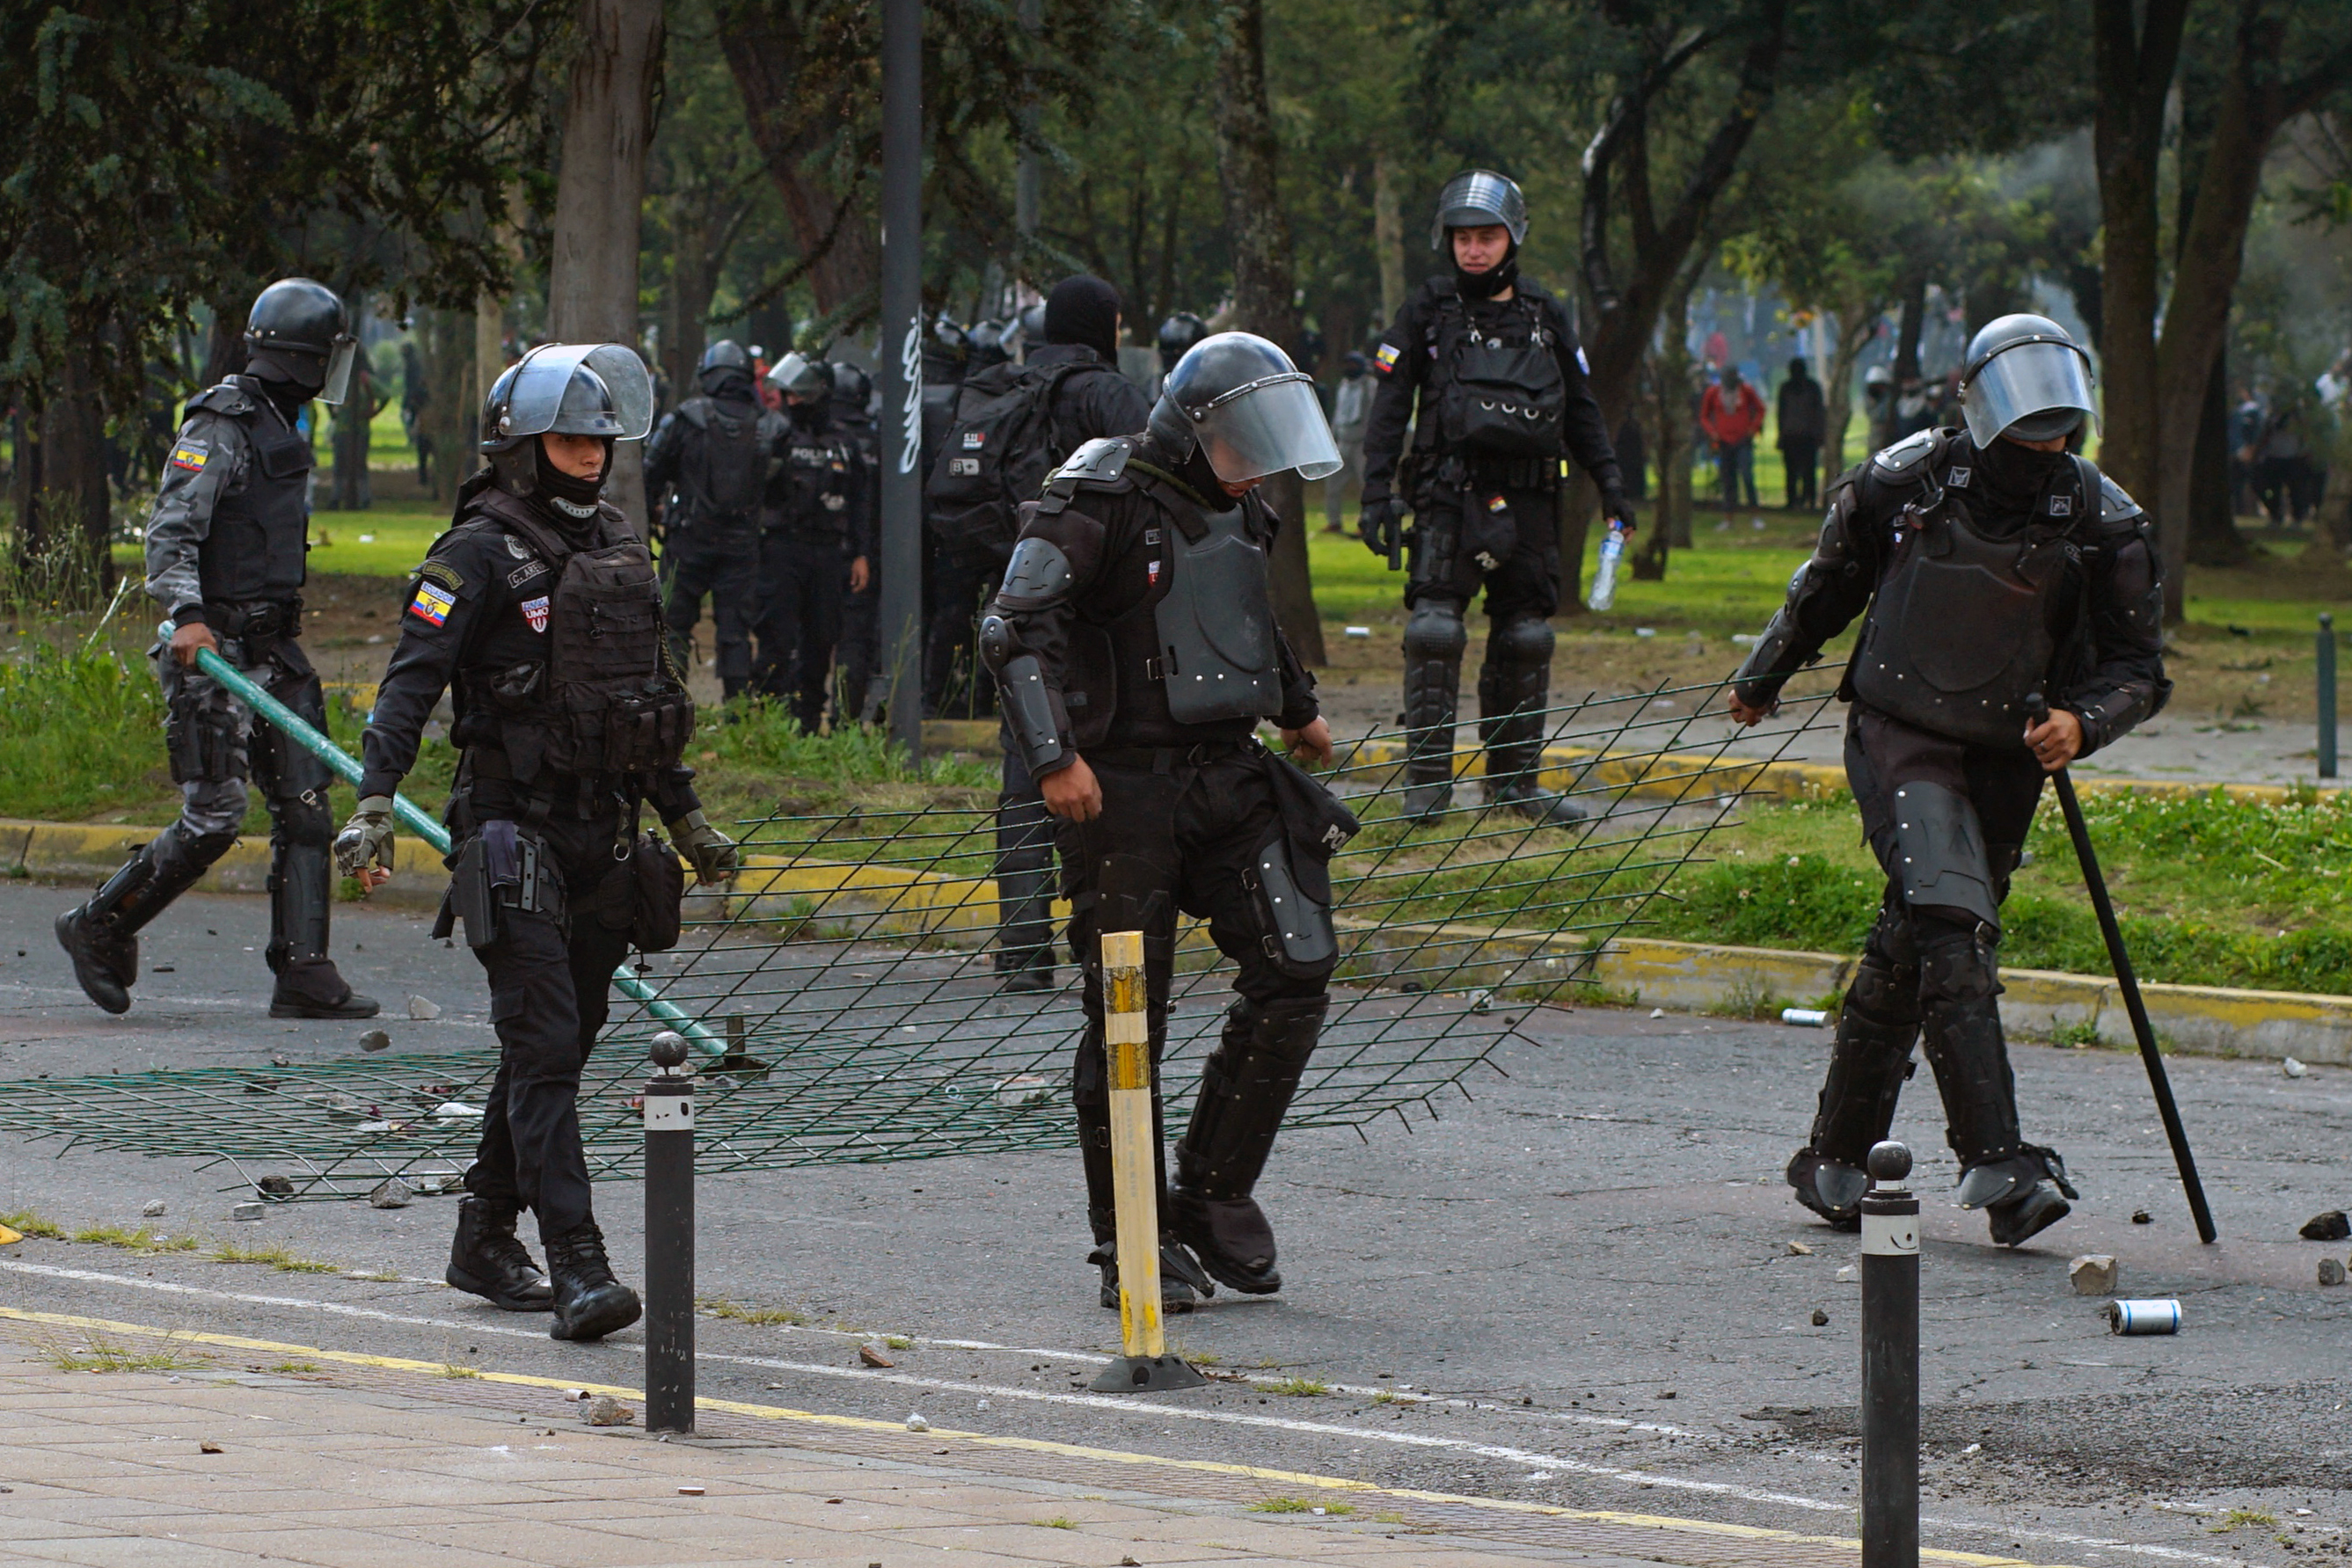 Ecuadorean riot police pull a piece of wire mesh netting while confronting demonstrators near the House of Ecuadorean Culture in Quito, on June 21, 2022, on the ninth consecutive day of protests against the government. - Police used tear gas to disperse some 500 protesters, among thousands who arrived in Quito from around the country in recent days, during the Indigenous-led fuel price protests the military described as a "grave threat." (Photo by Veronica LOMBEIDA / AFP)